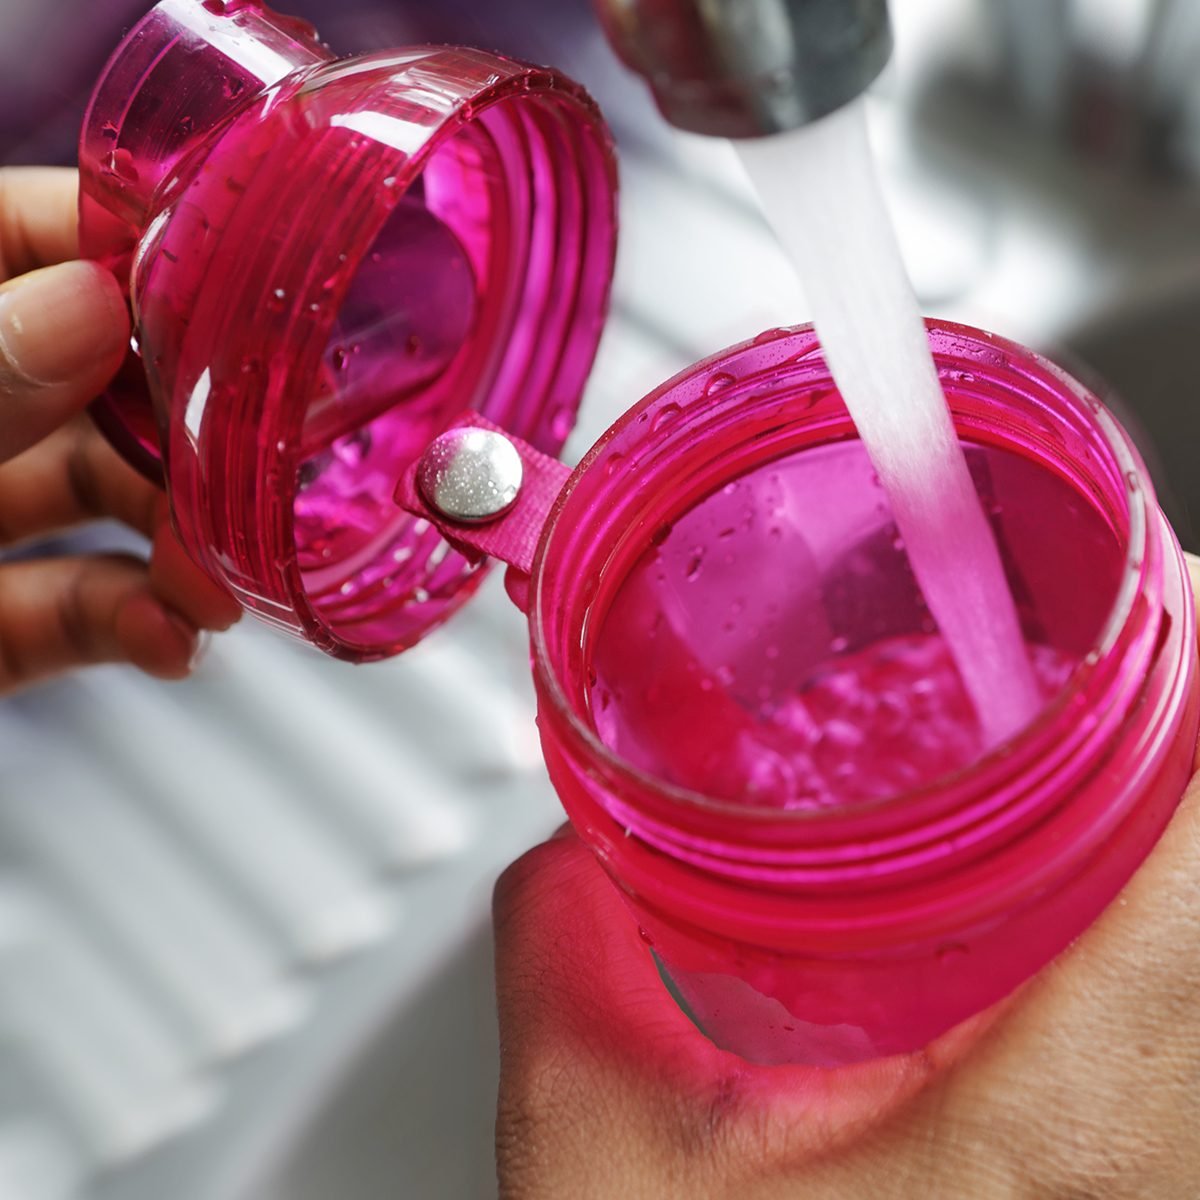 How to Clean Your Water Bottle